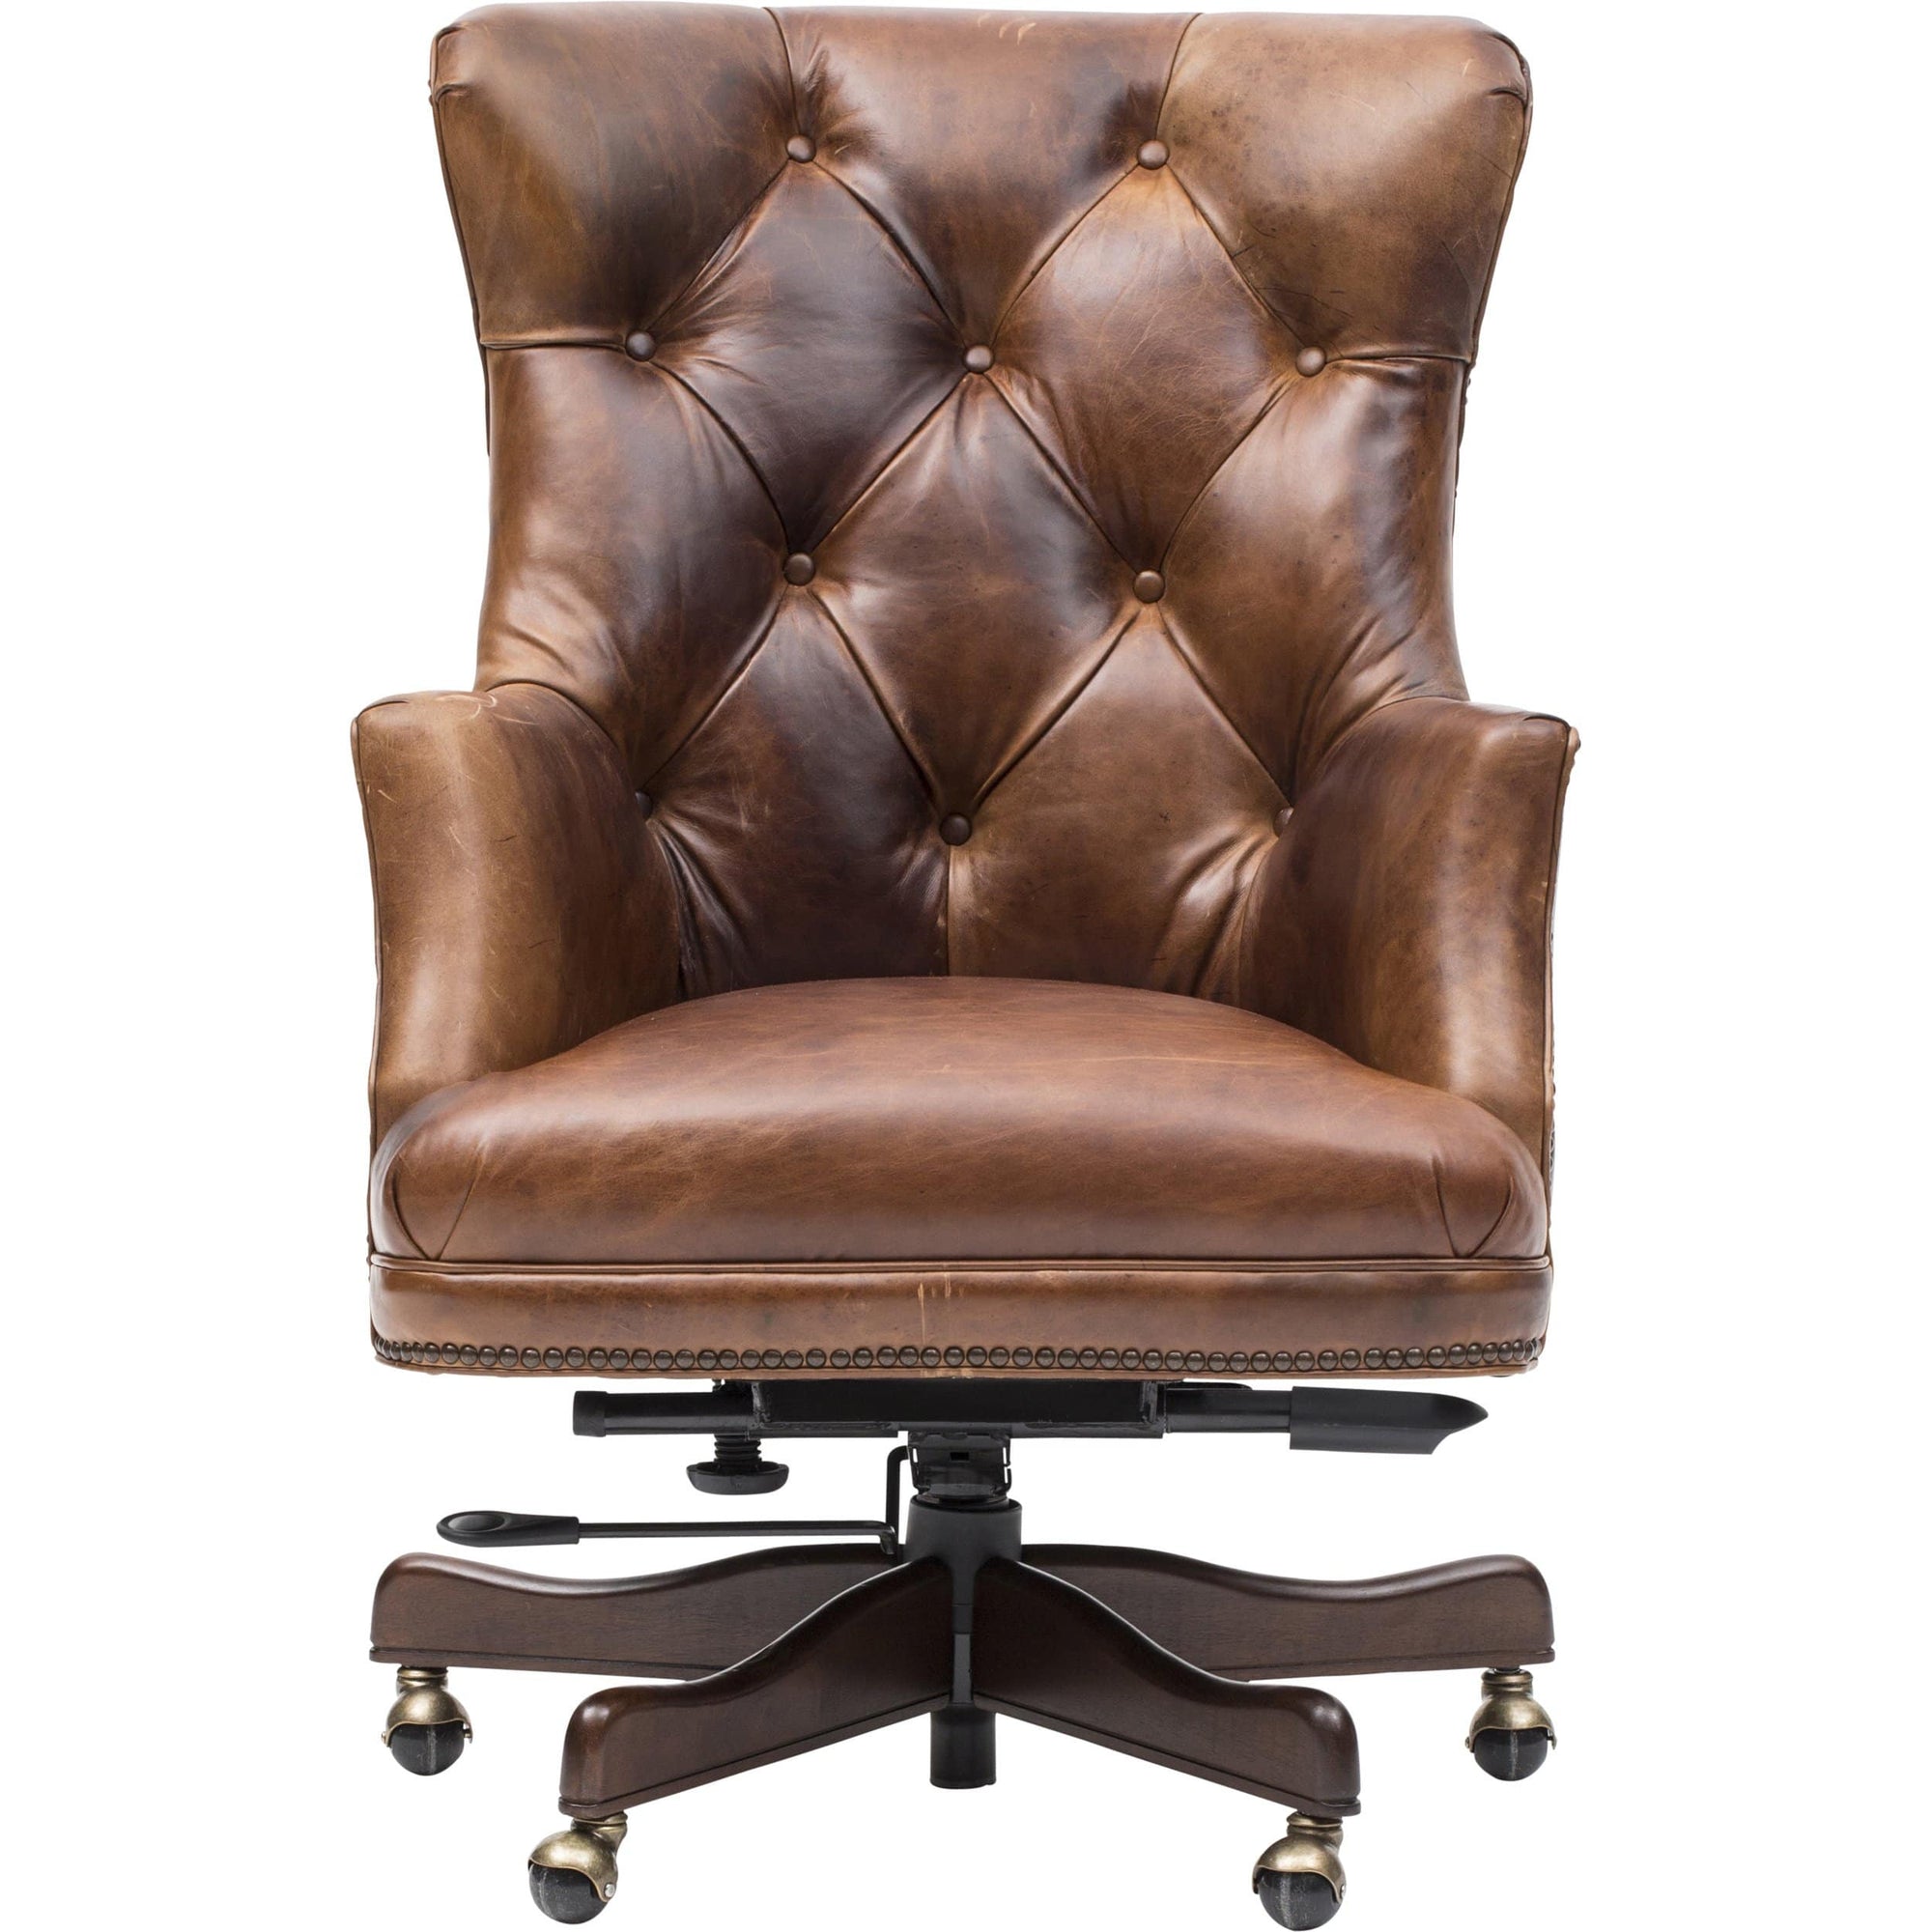 Theodore Executive Leather Office Chair – High Fashion Home